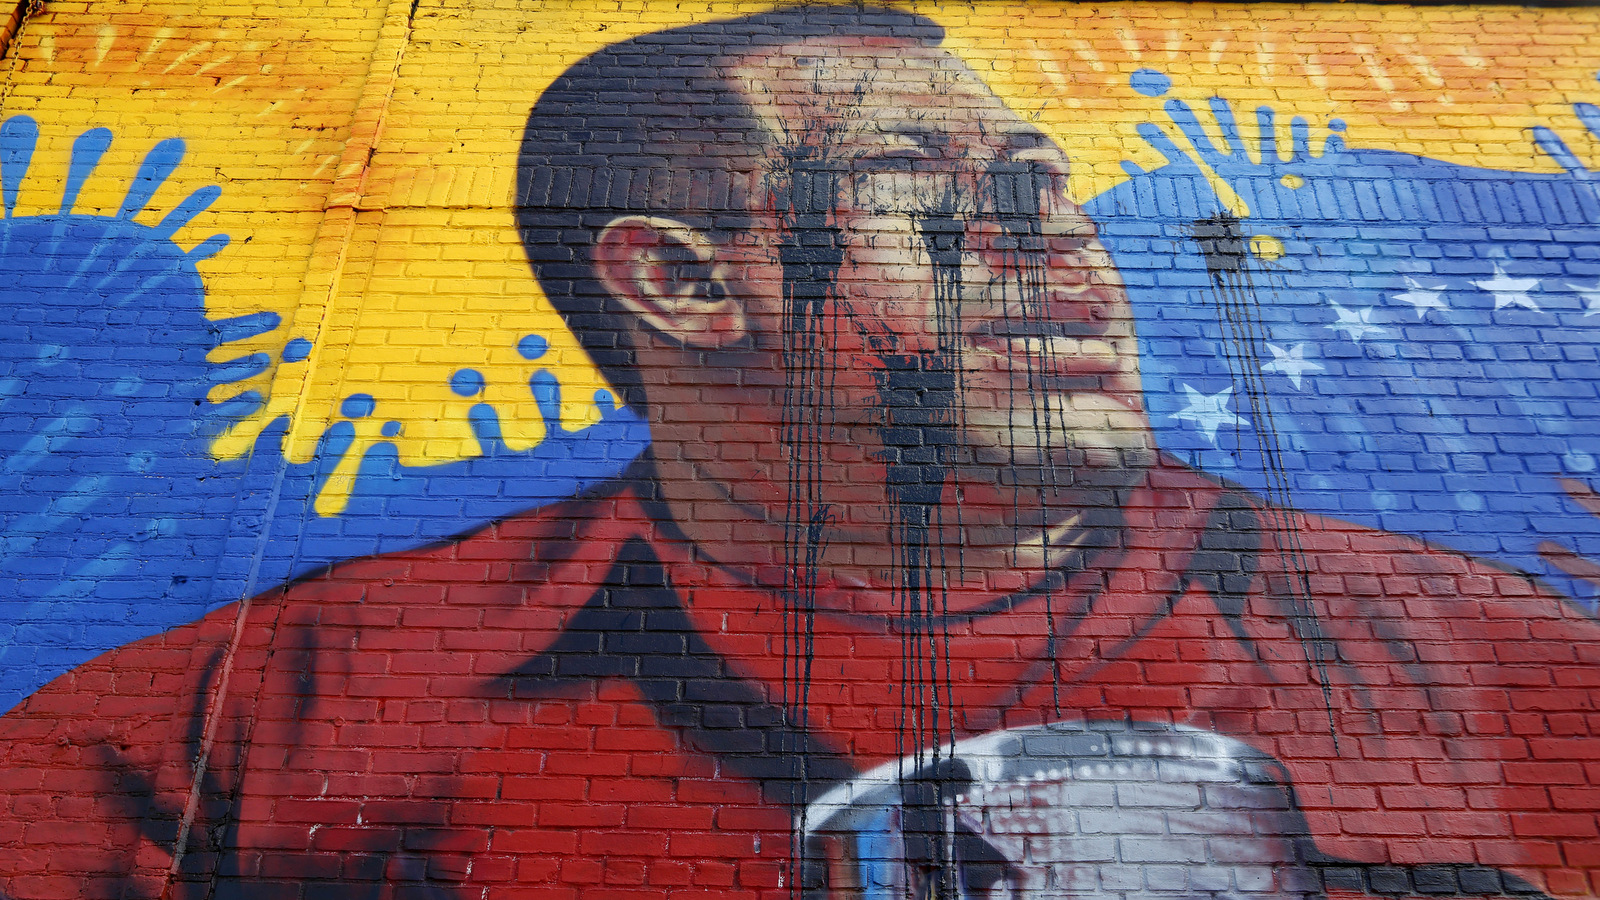 A mural featuring an image of former Venezuelan President Hugo Chavez was defaced in the Bronx borough of New York, Tuesday, May 9, 2017. (AP/Seth Wenig)